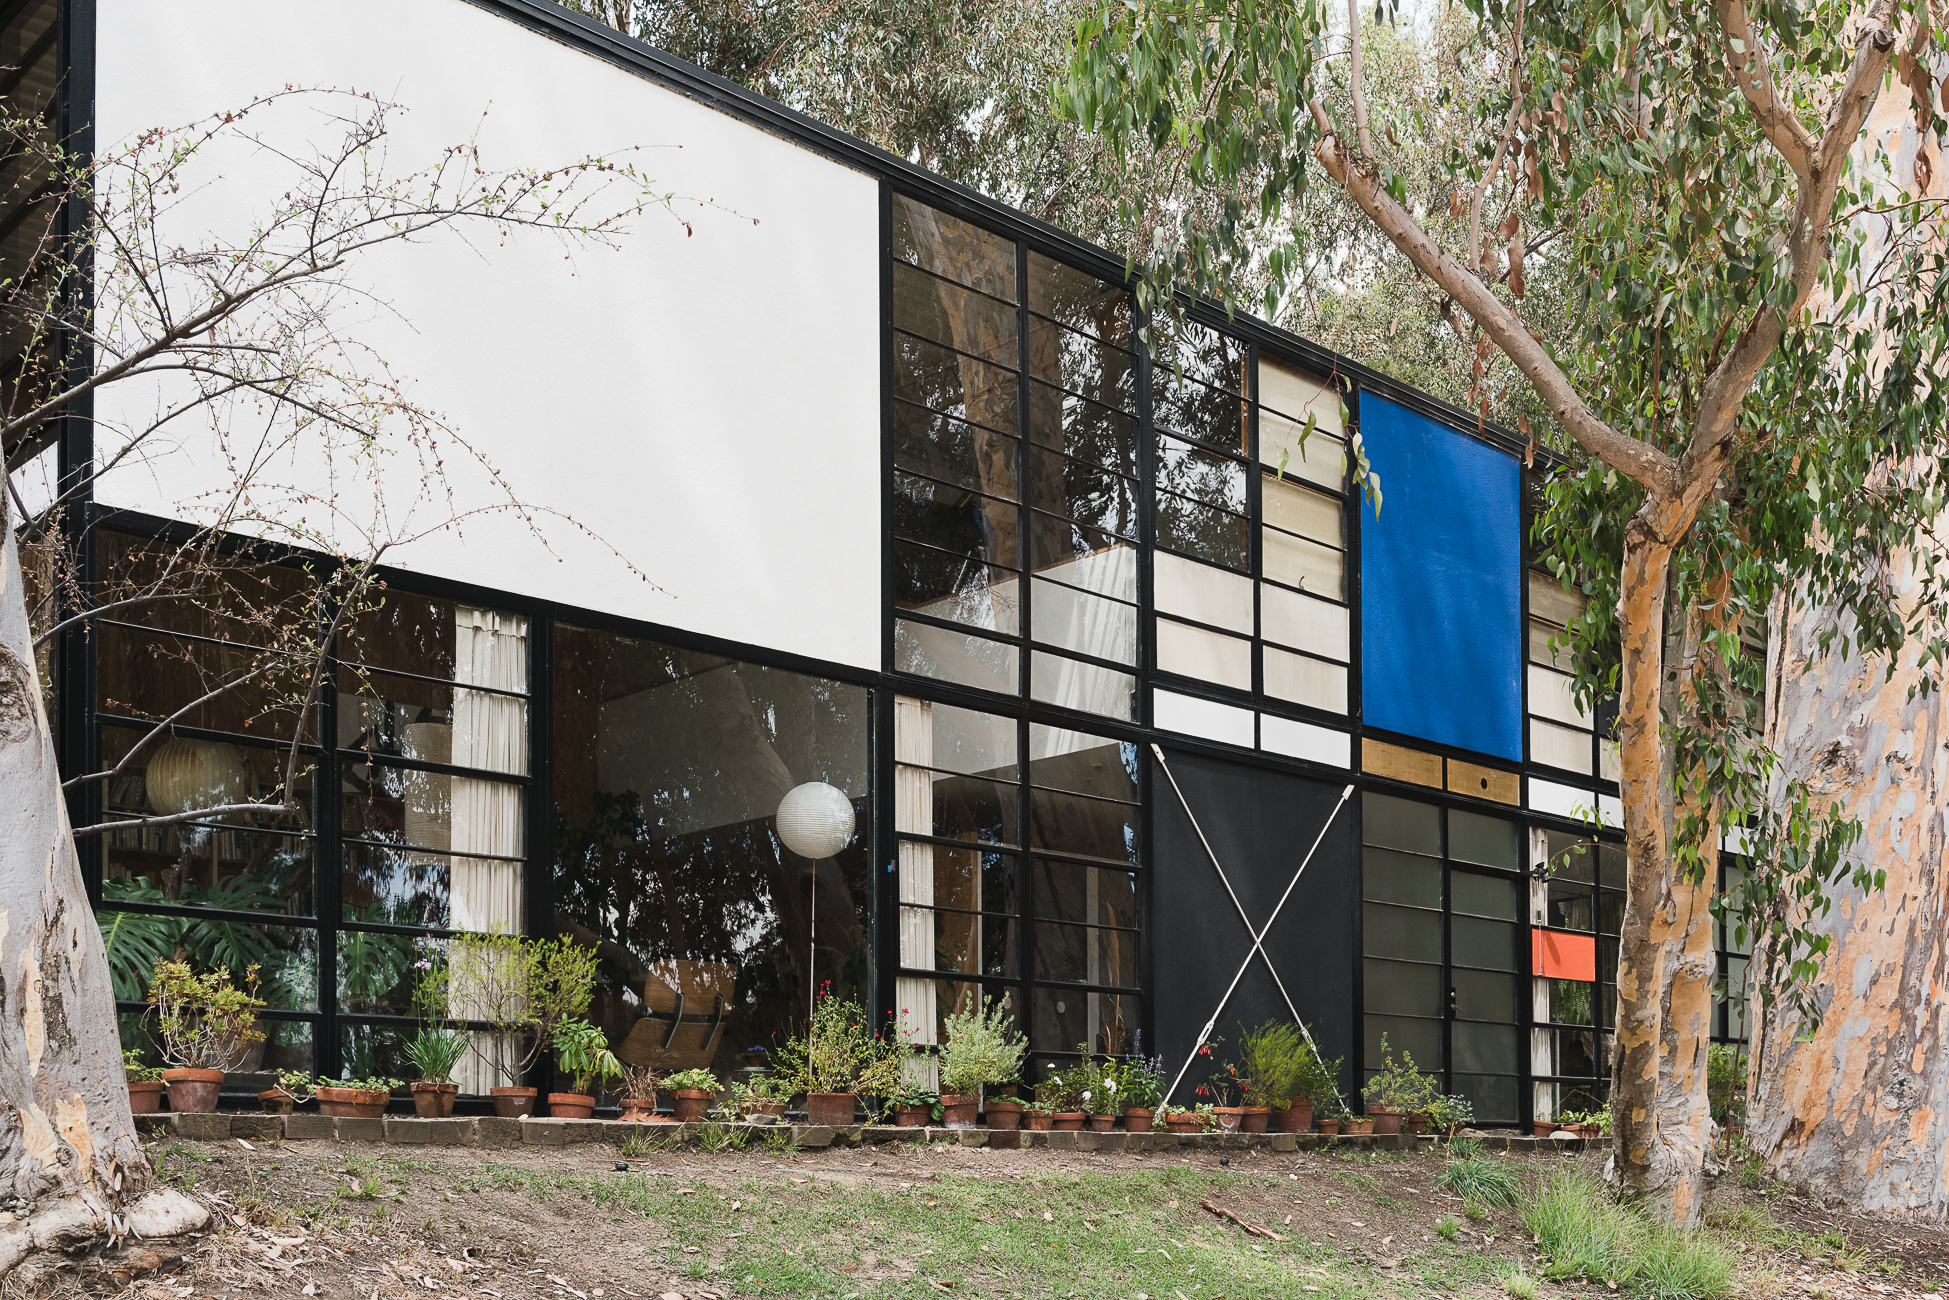 Visiting the Eames House Case Study #8 / See and Savour